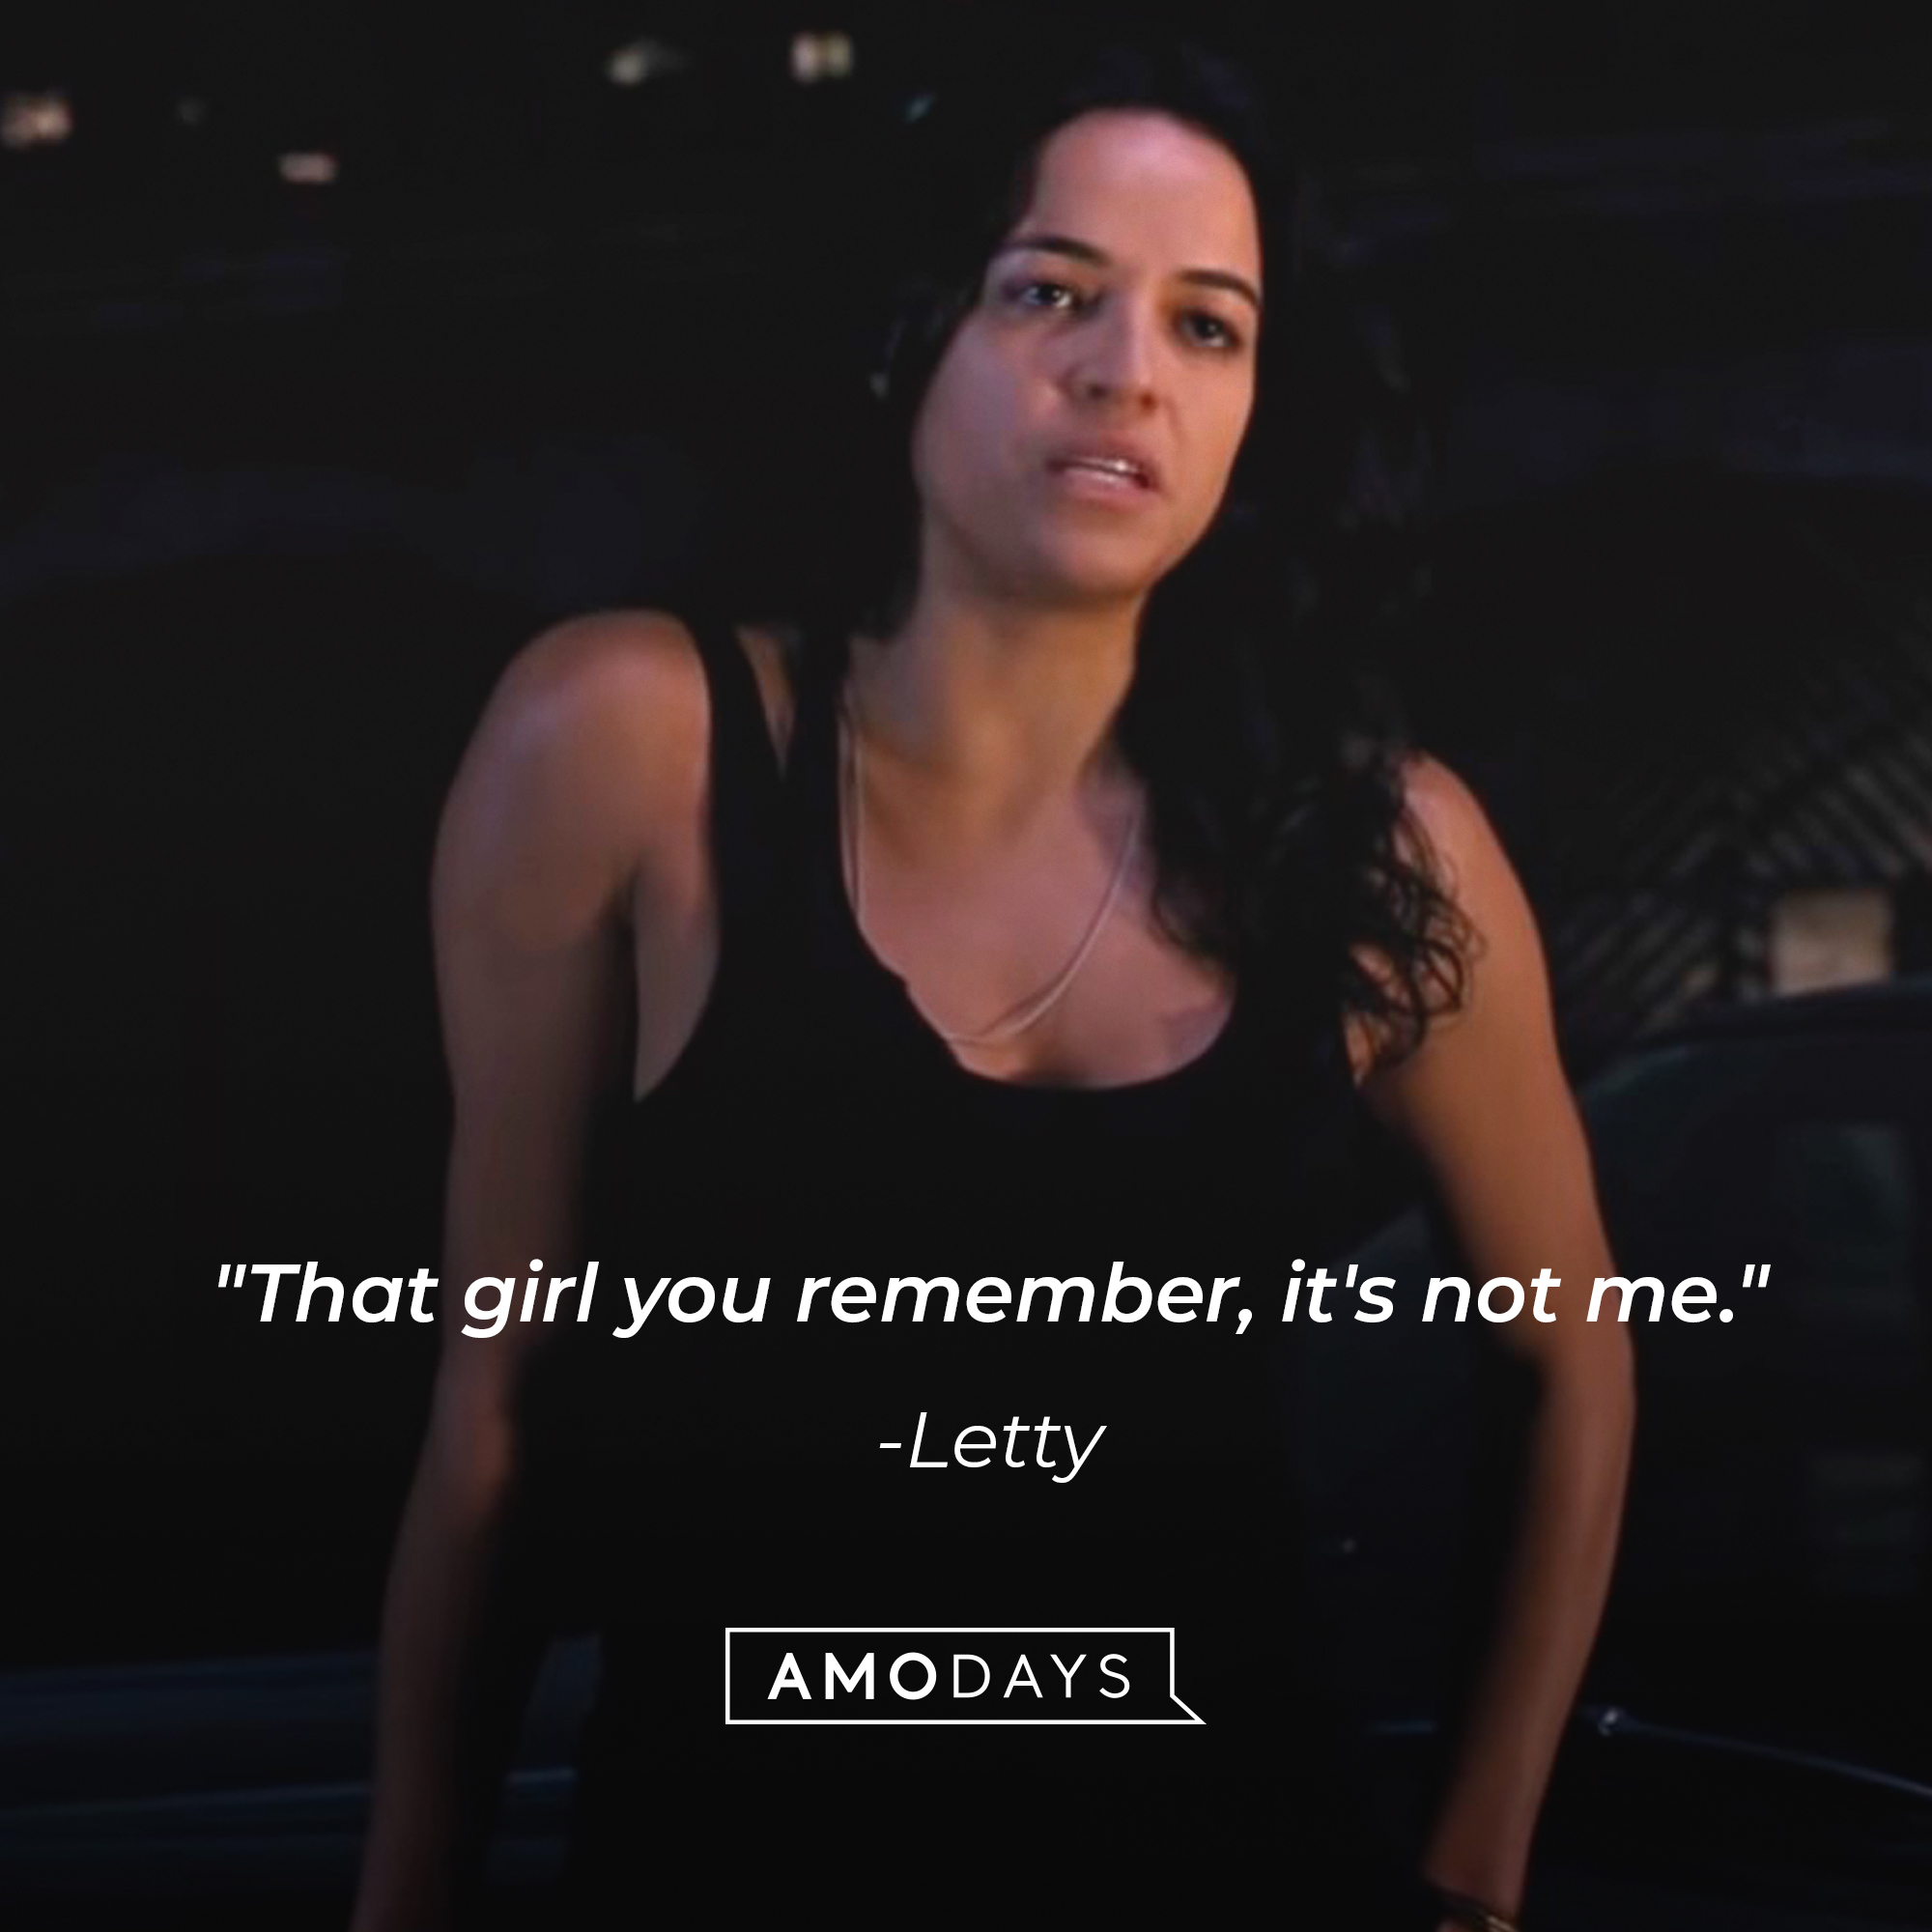 Letty's quote: "That girl you remember, it's not me." | Source: facebook.com/TheFastSaga